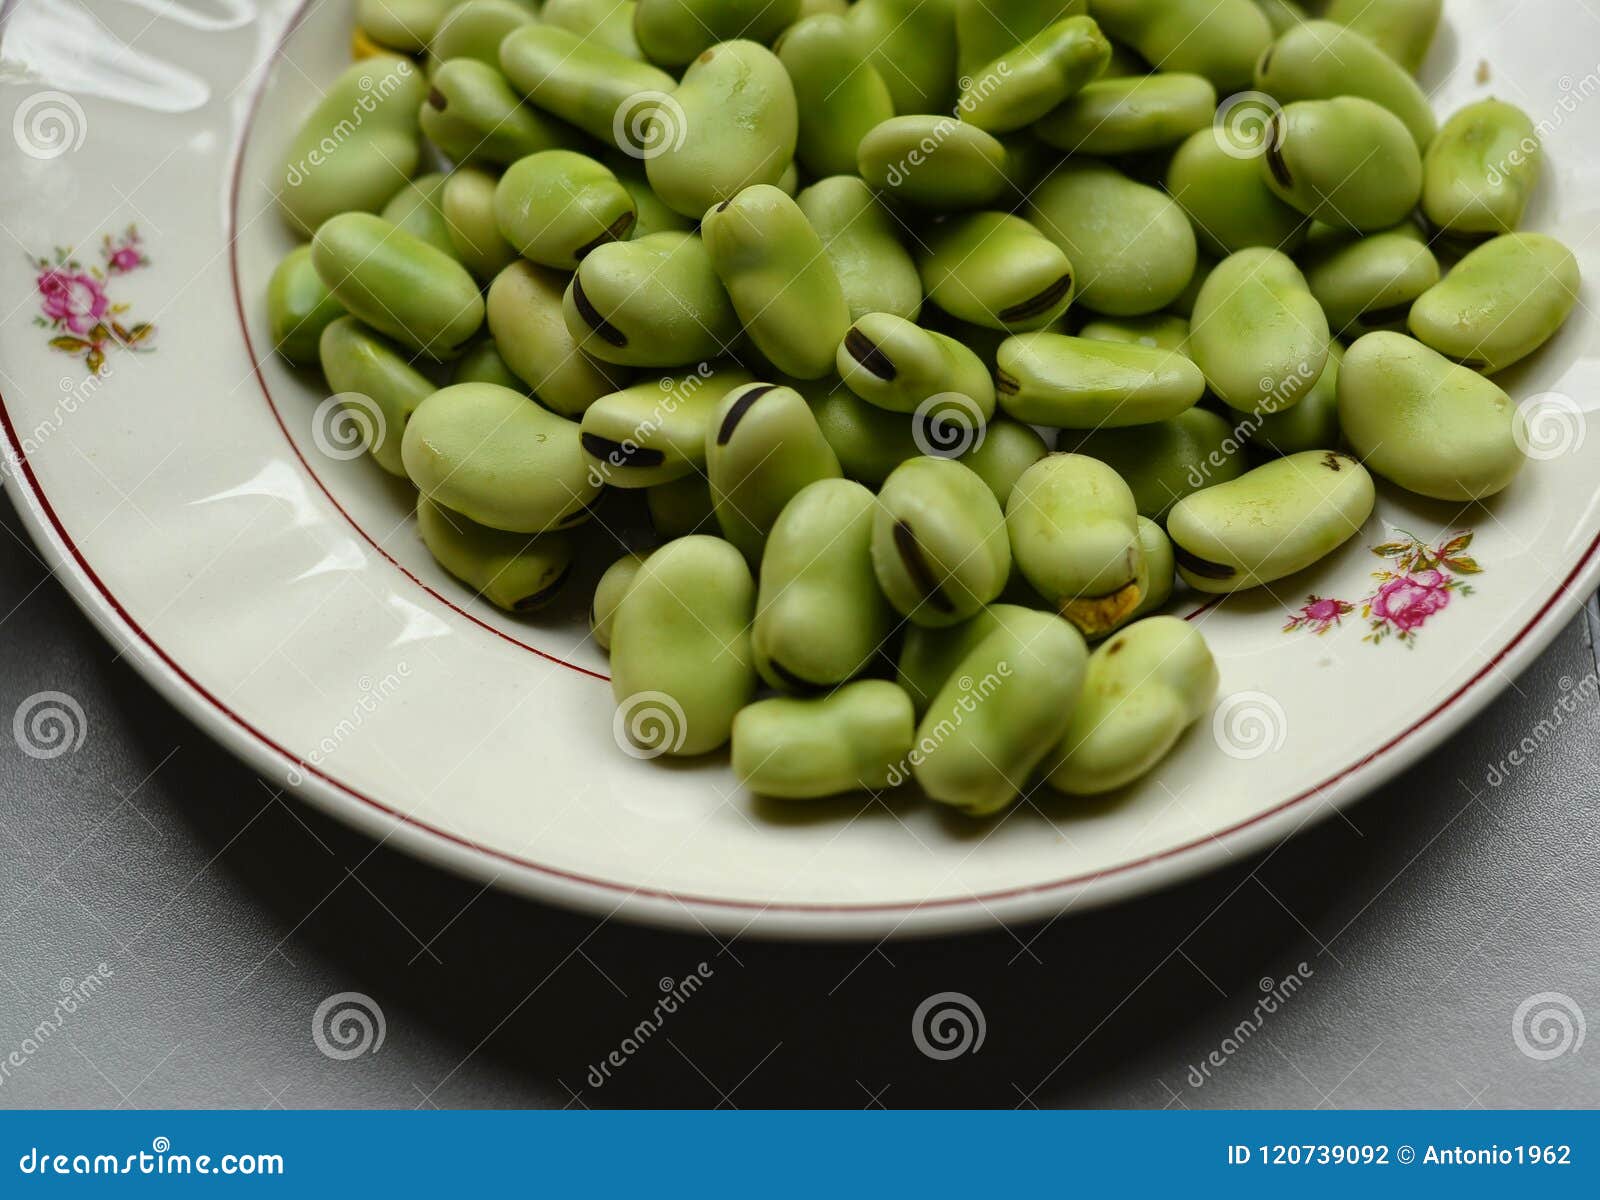 Broad Beans with Skin Removed Stock Photo - Image of mediterranean ...